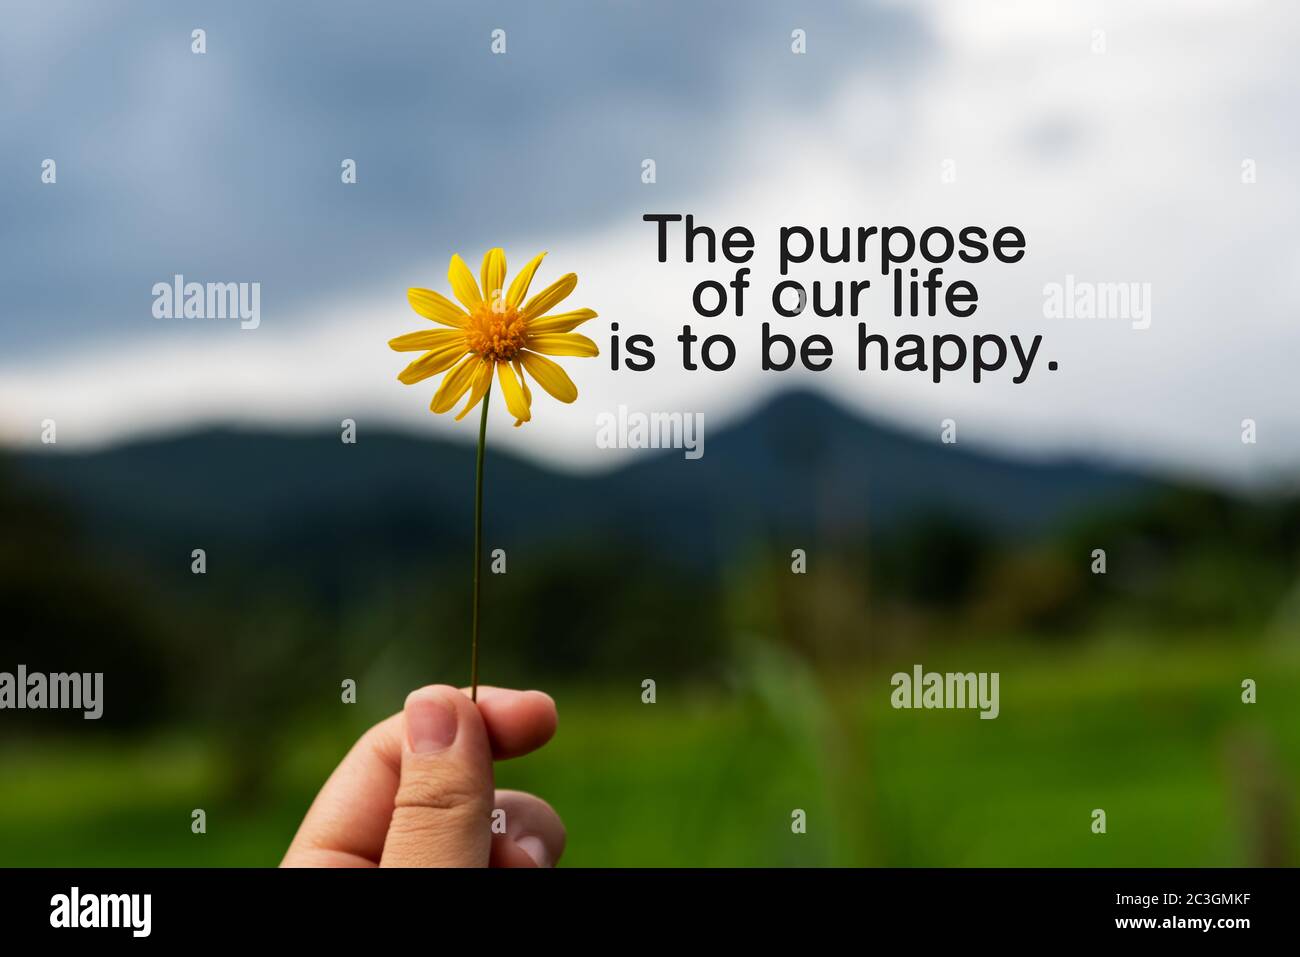 Inspirational quotes - The purpose of our life is to be happy ...